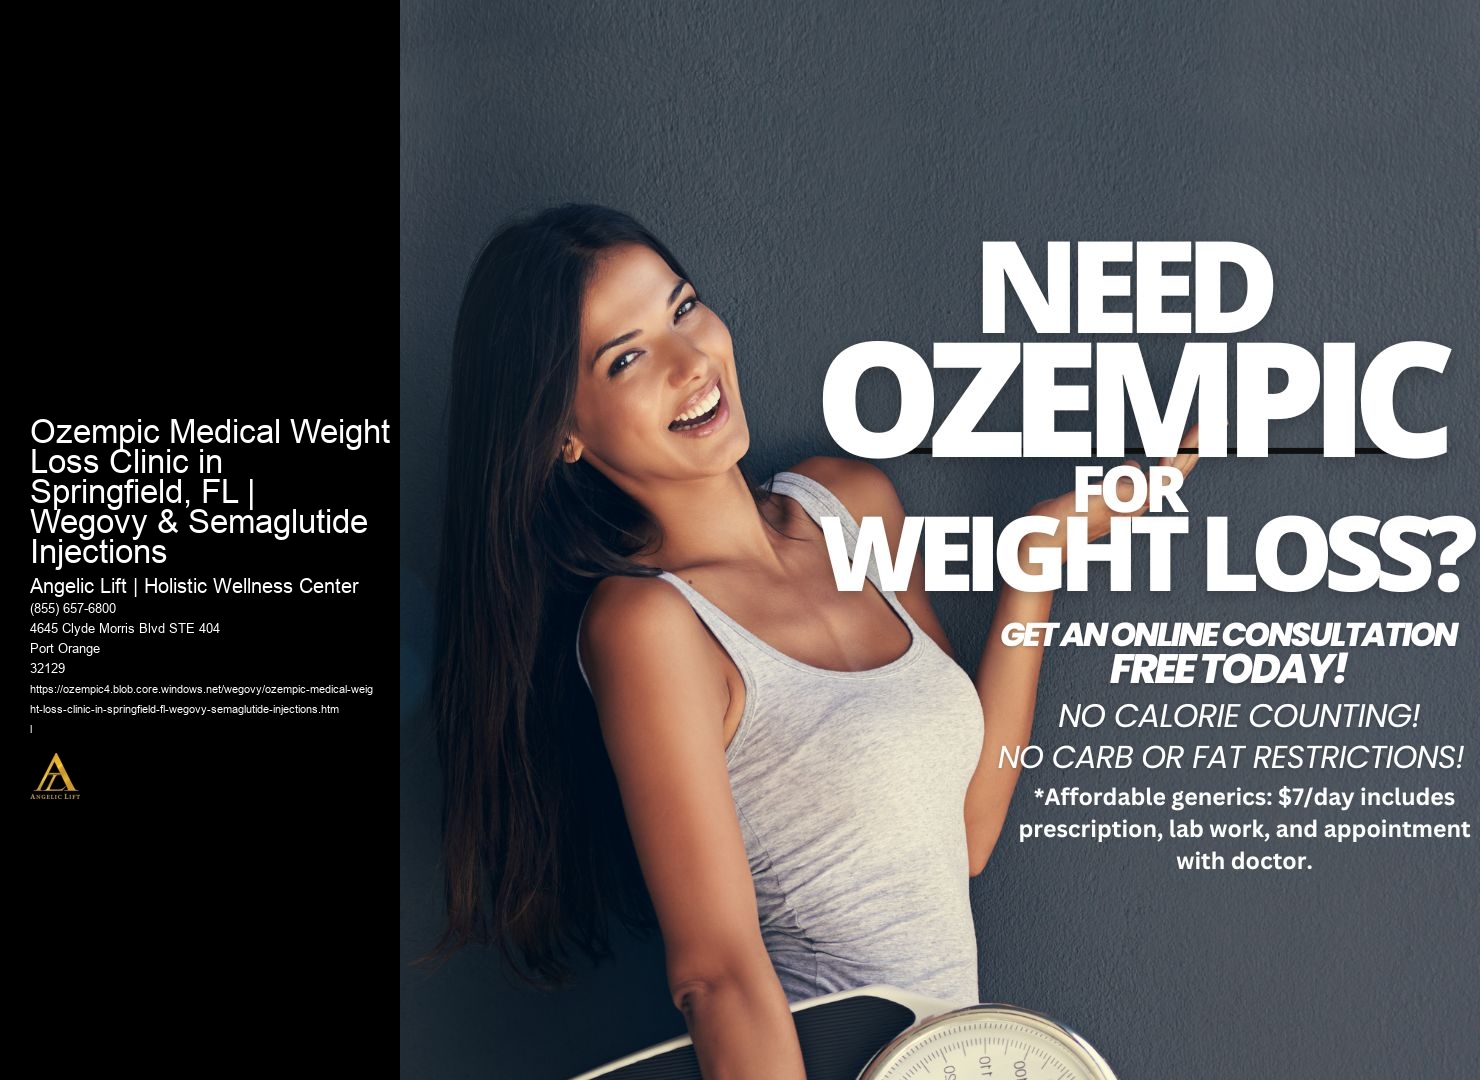 Ozempic Medical Weight Loss Clinic in Springfield, FL | Wegovy & Semaglutide Injections